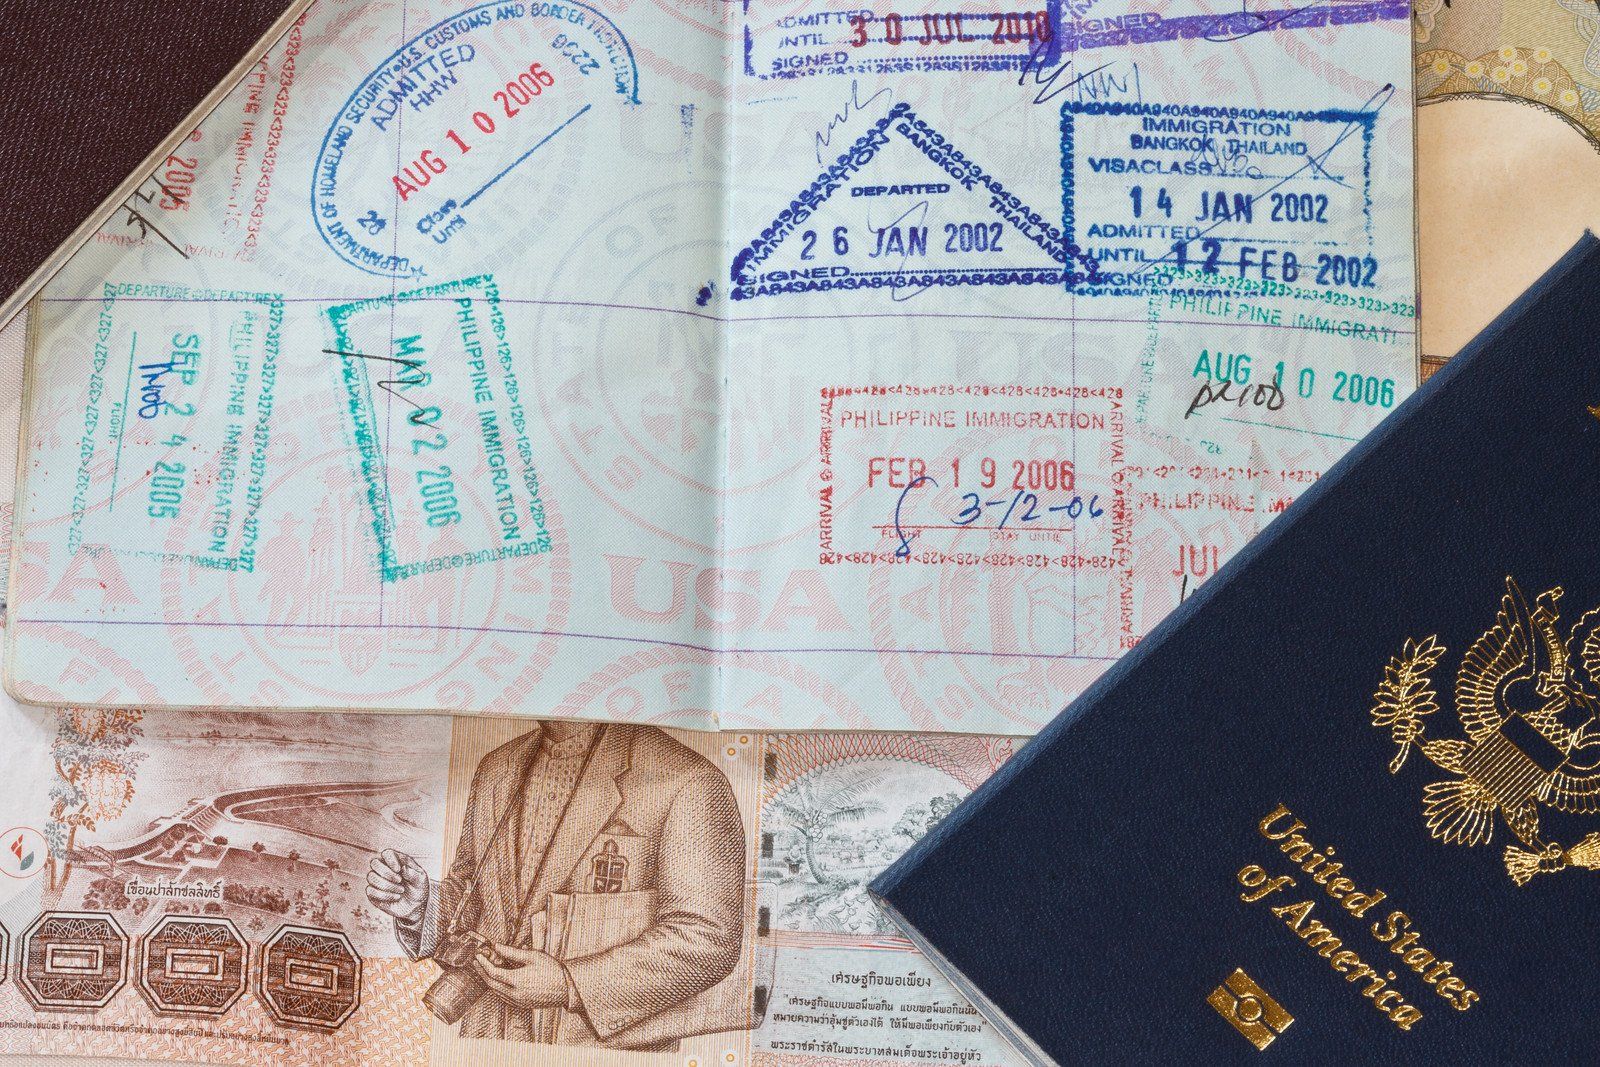 Expedite Passports and Visas to travel in confidence.